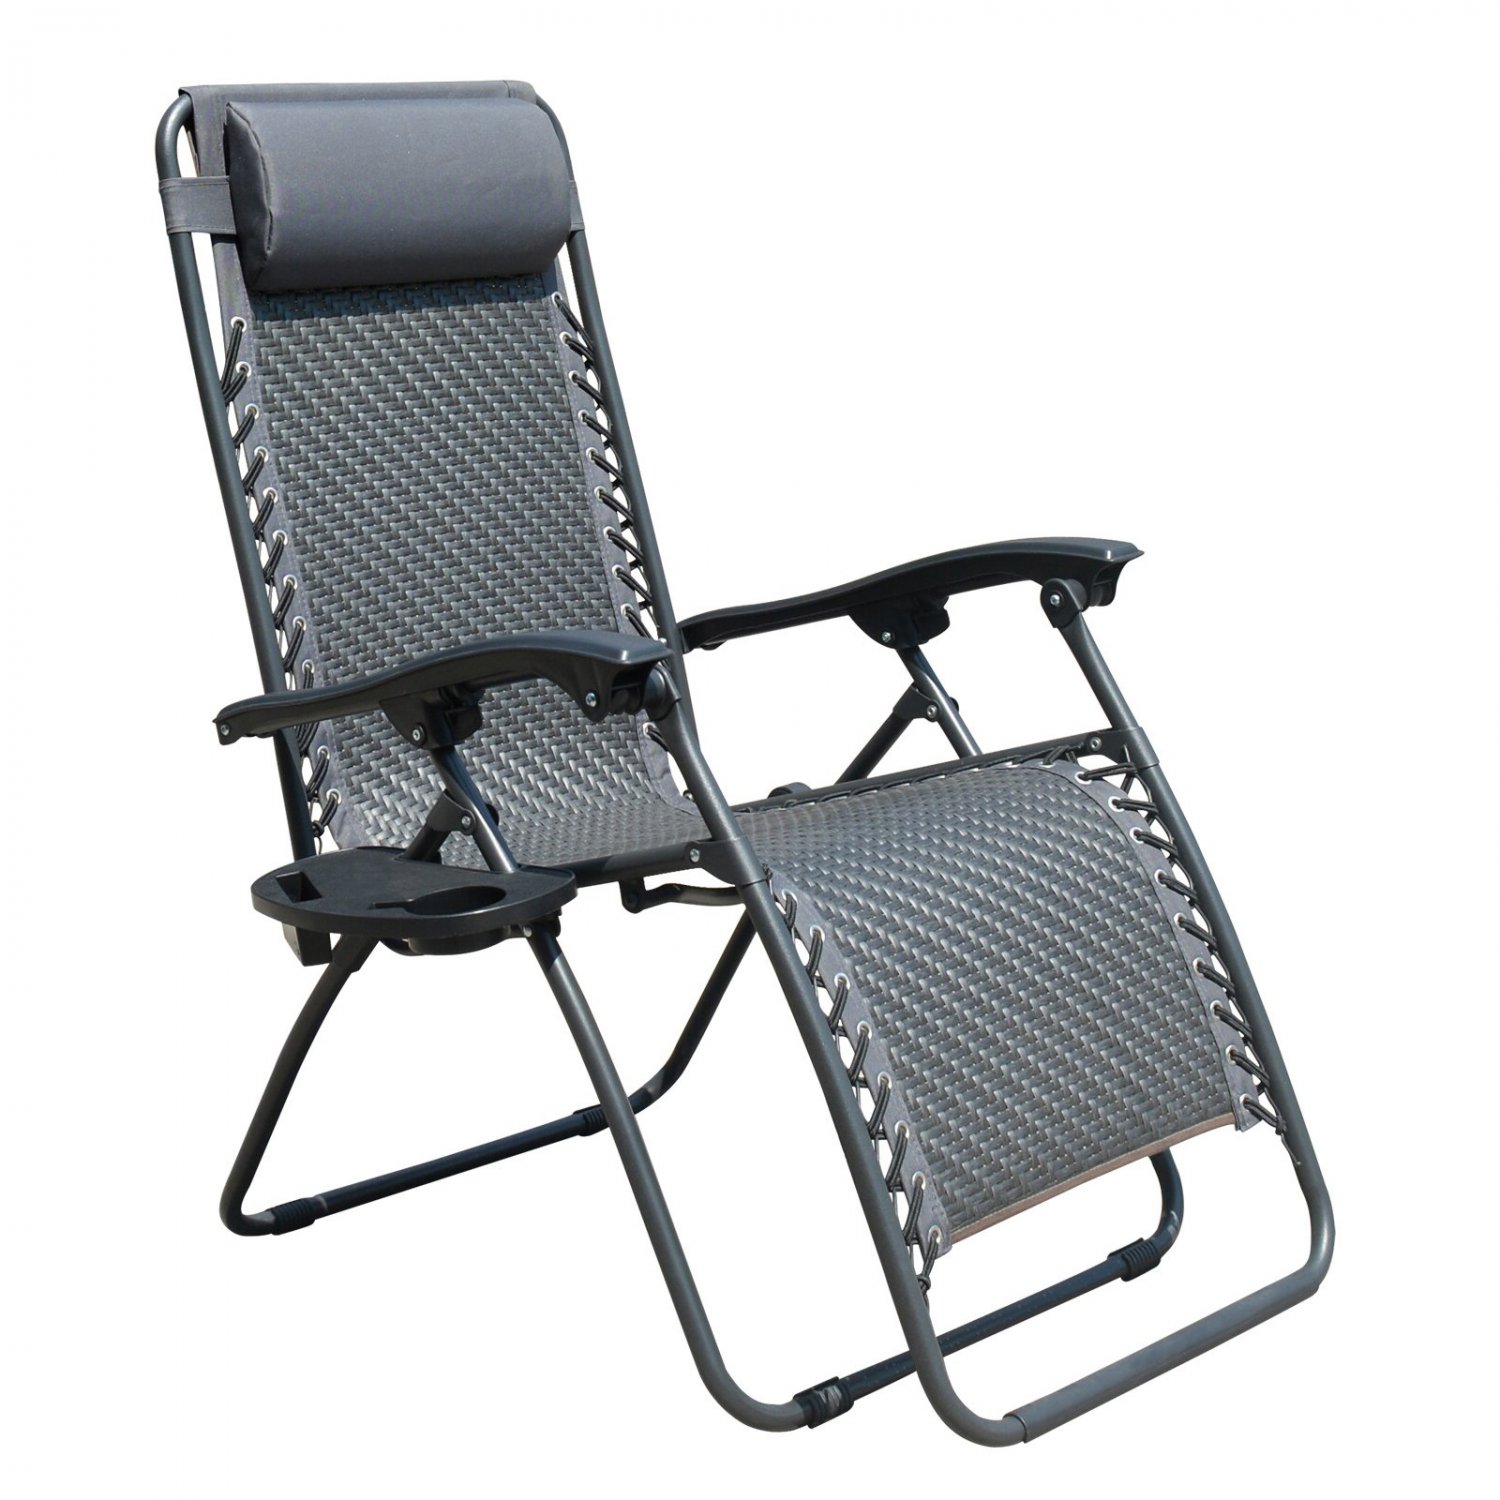 Outdoor Adjustable Folding Patio Lounge Chair with Pillows & Cup Holder Trays